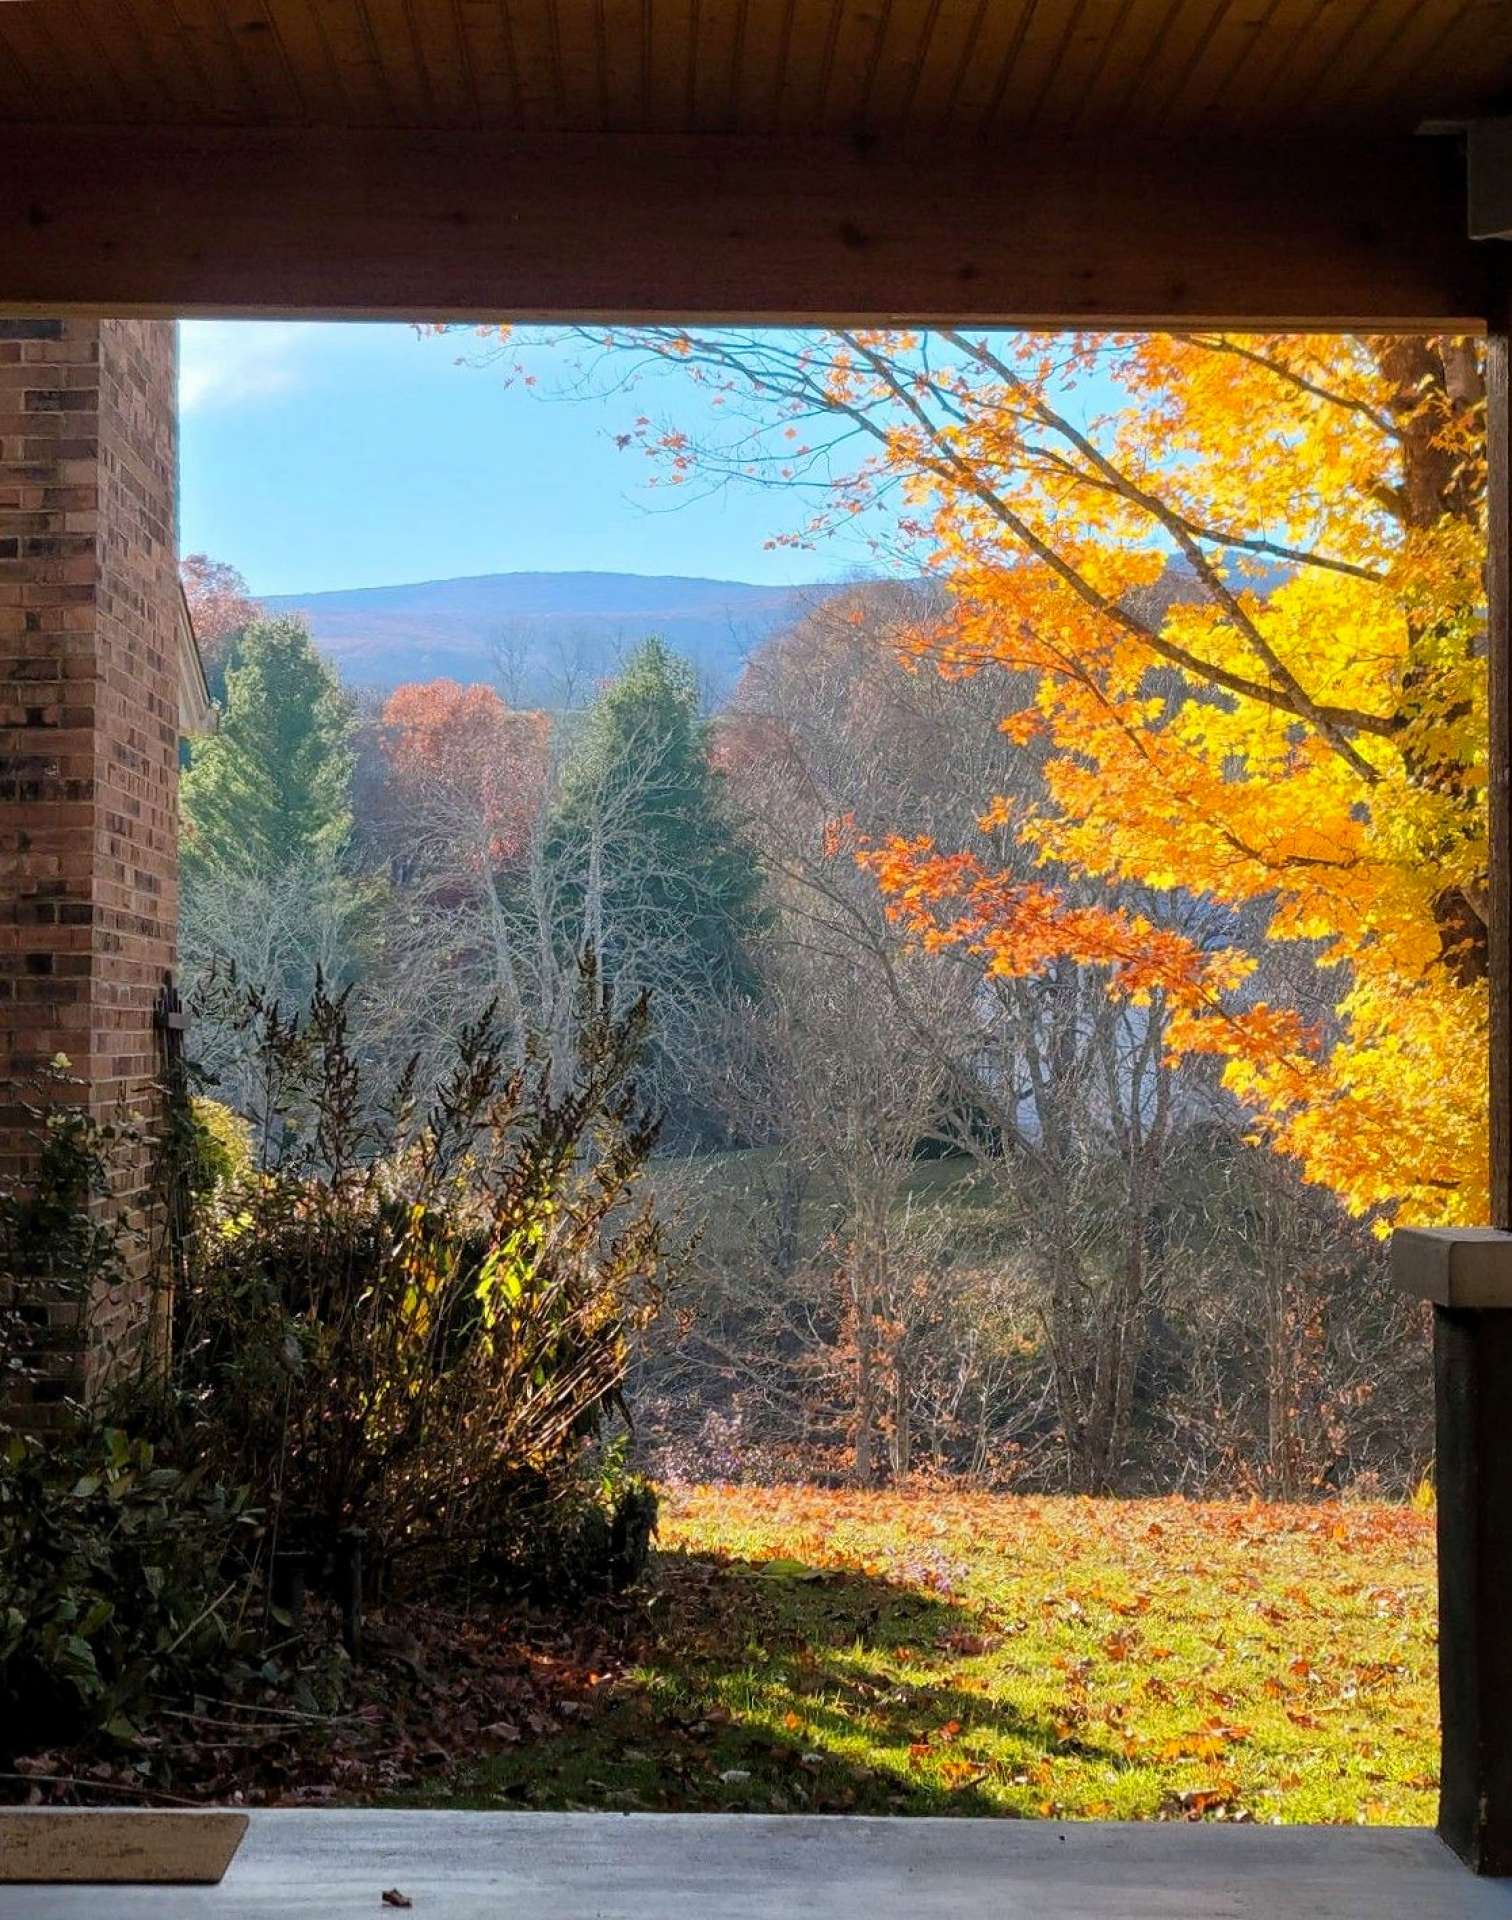 The Seller provided these photos of the Fall and winter view from the porch.